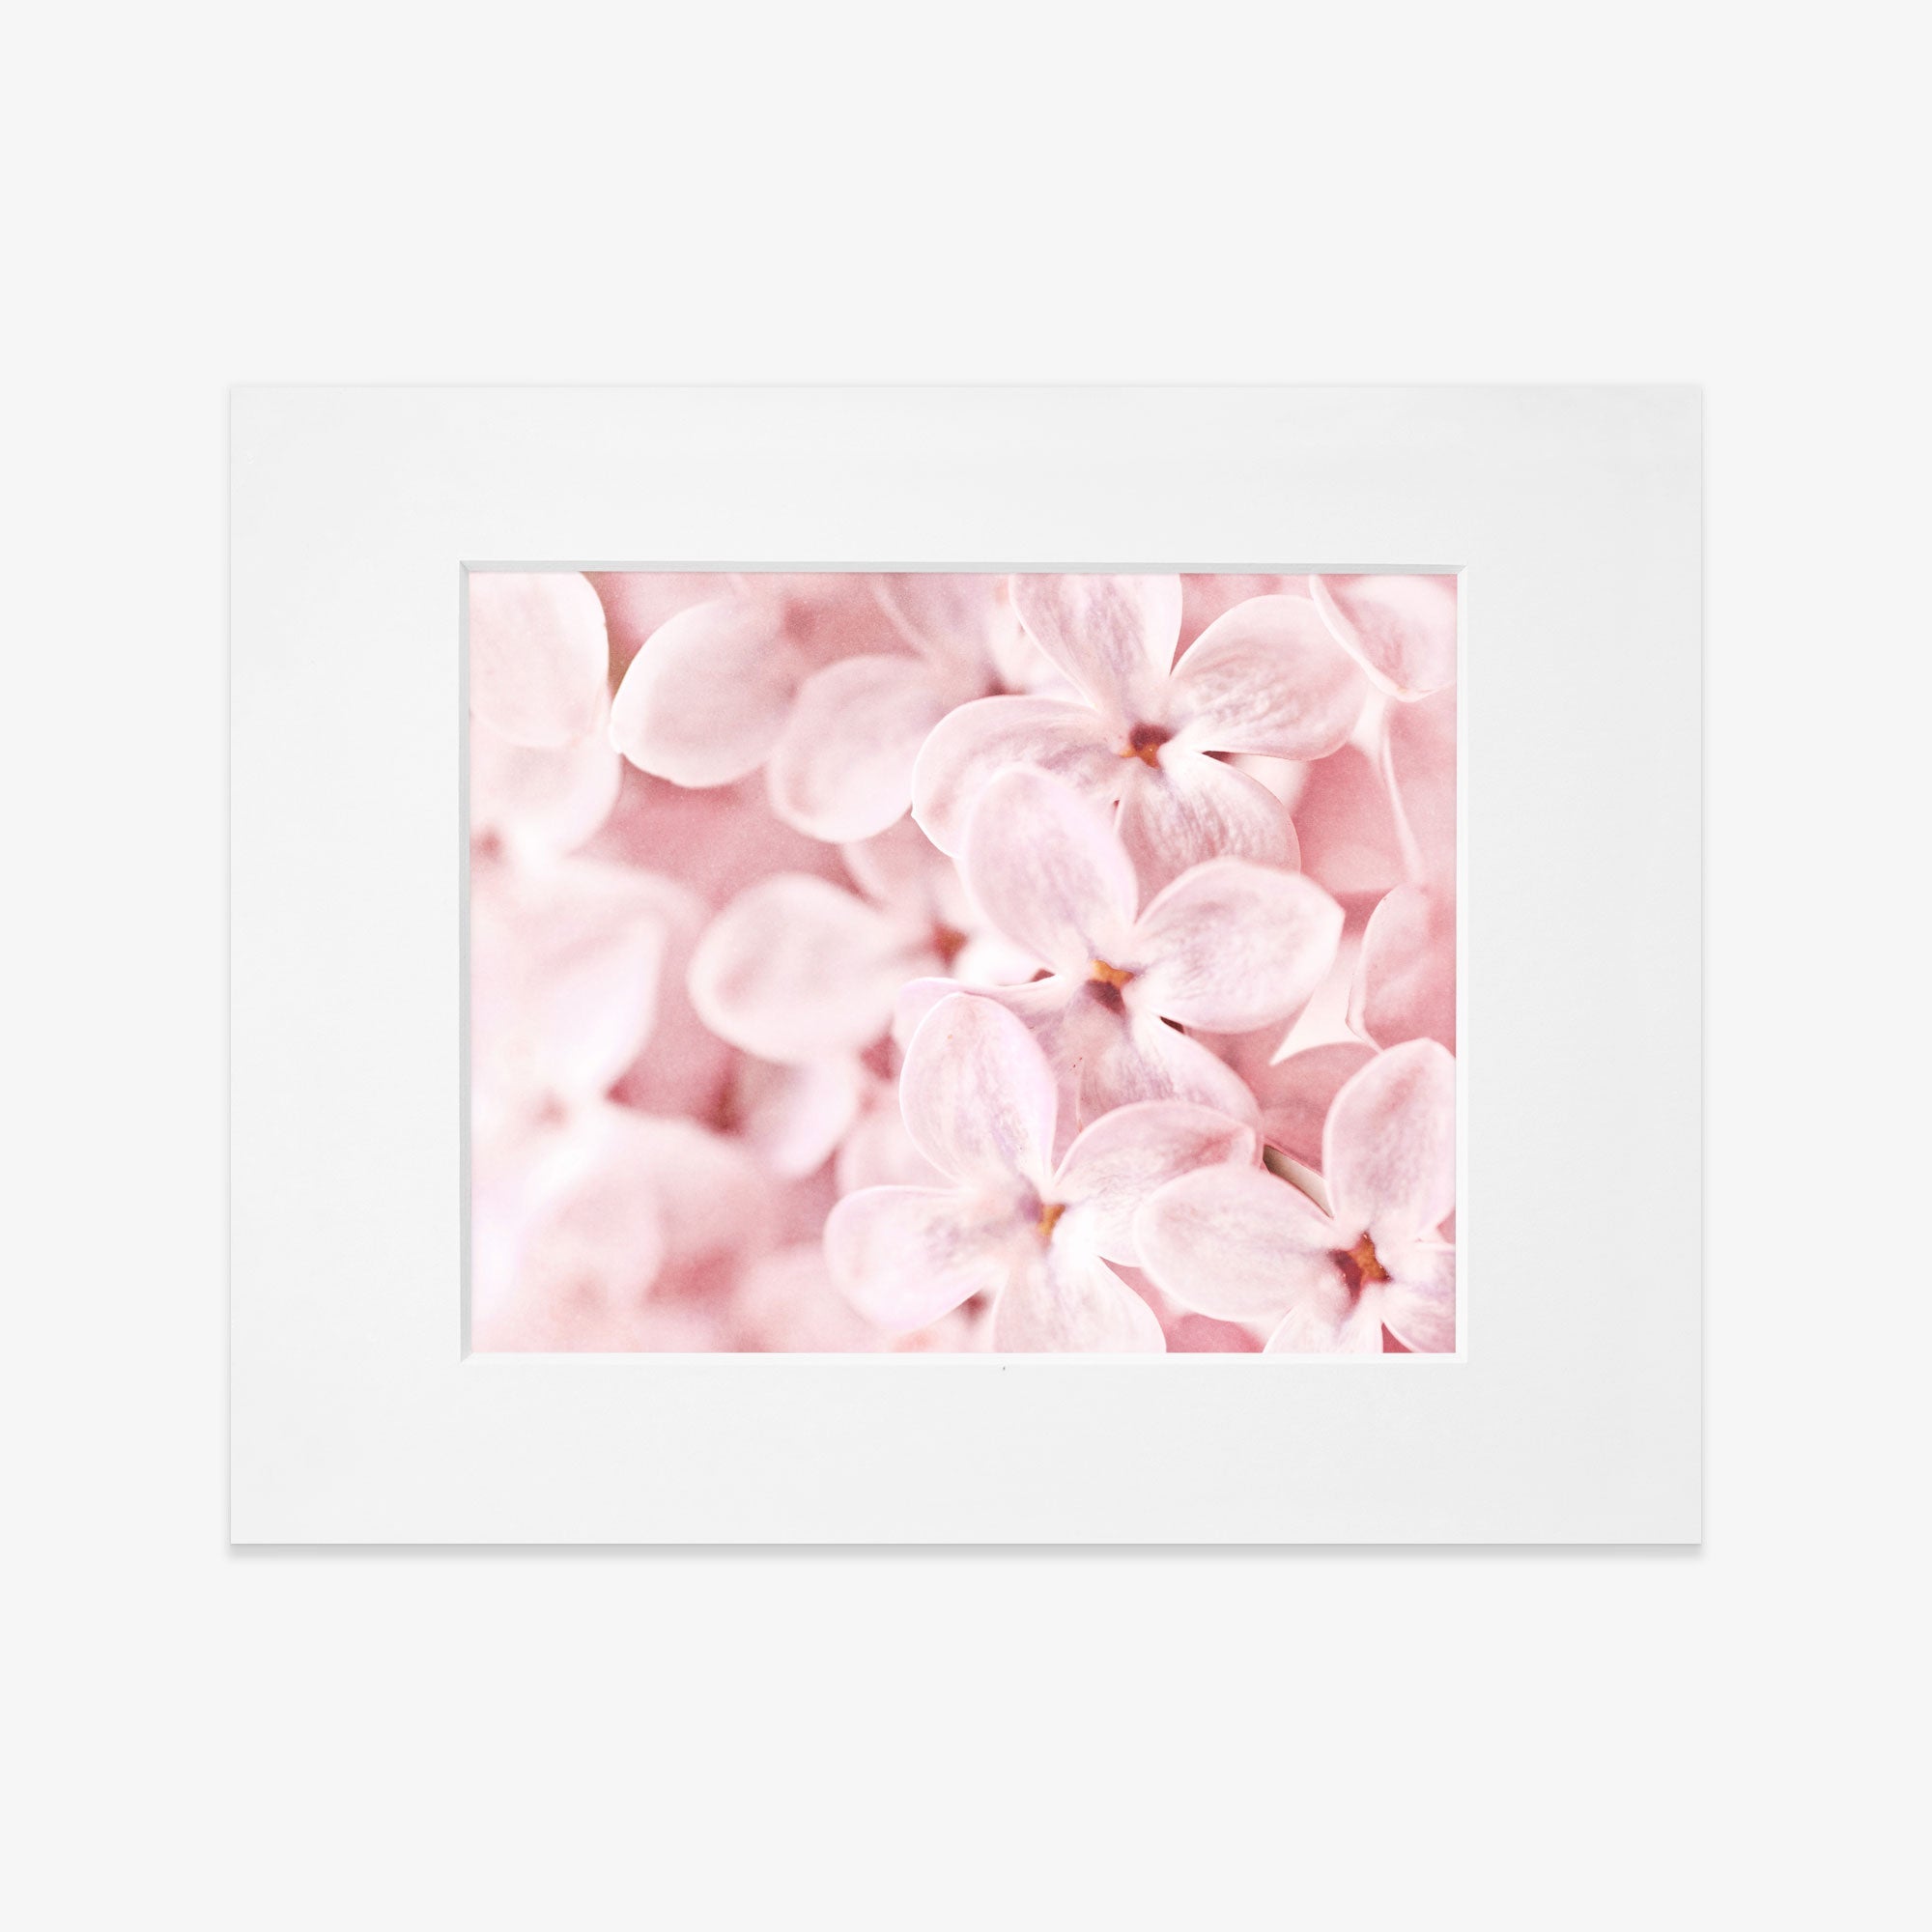 A framed Pink Botanical Print, &#39;Bed of Lilacs&#39; displaying a close-up shot of pink hydrangea flowers with soft focus on petals. The frame is white, complementing the gentle tones of the flowers by Offley Green.